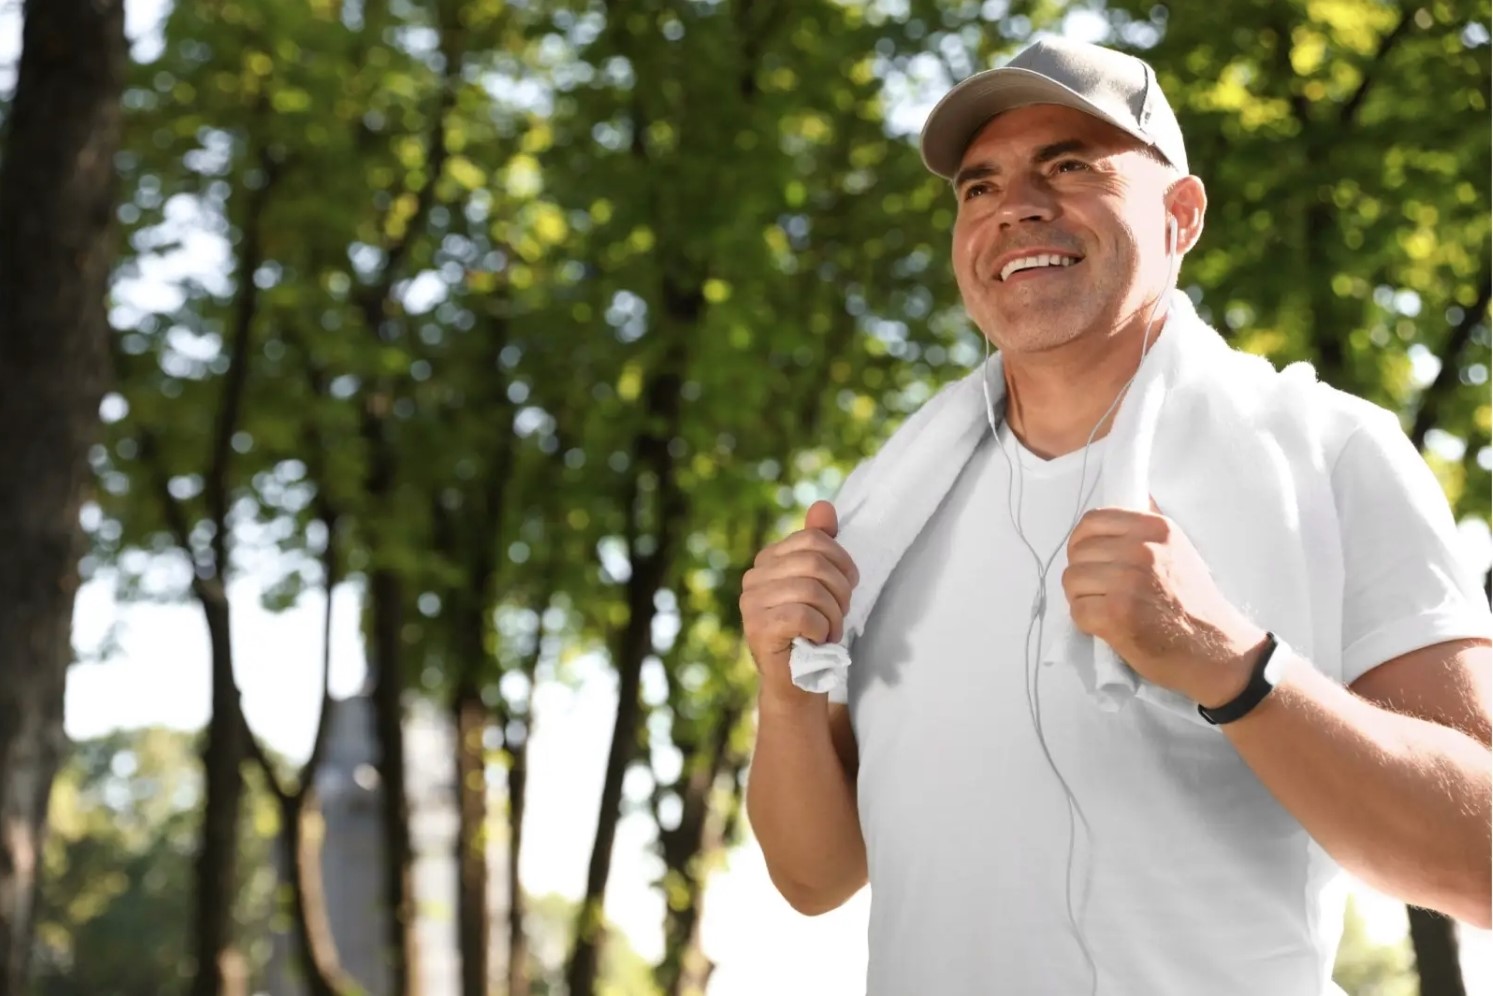 Man Smiling and Walking, Reducing Prostate Cancer Risk